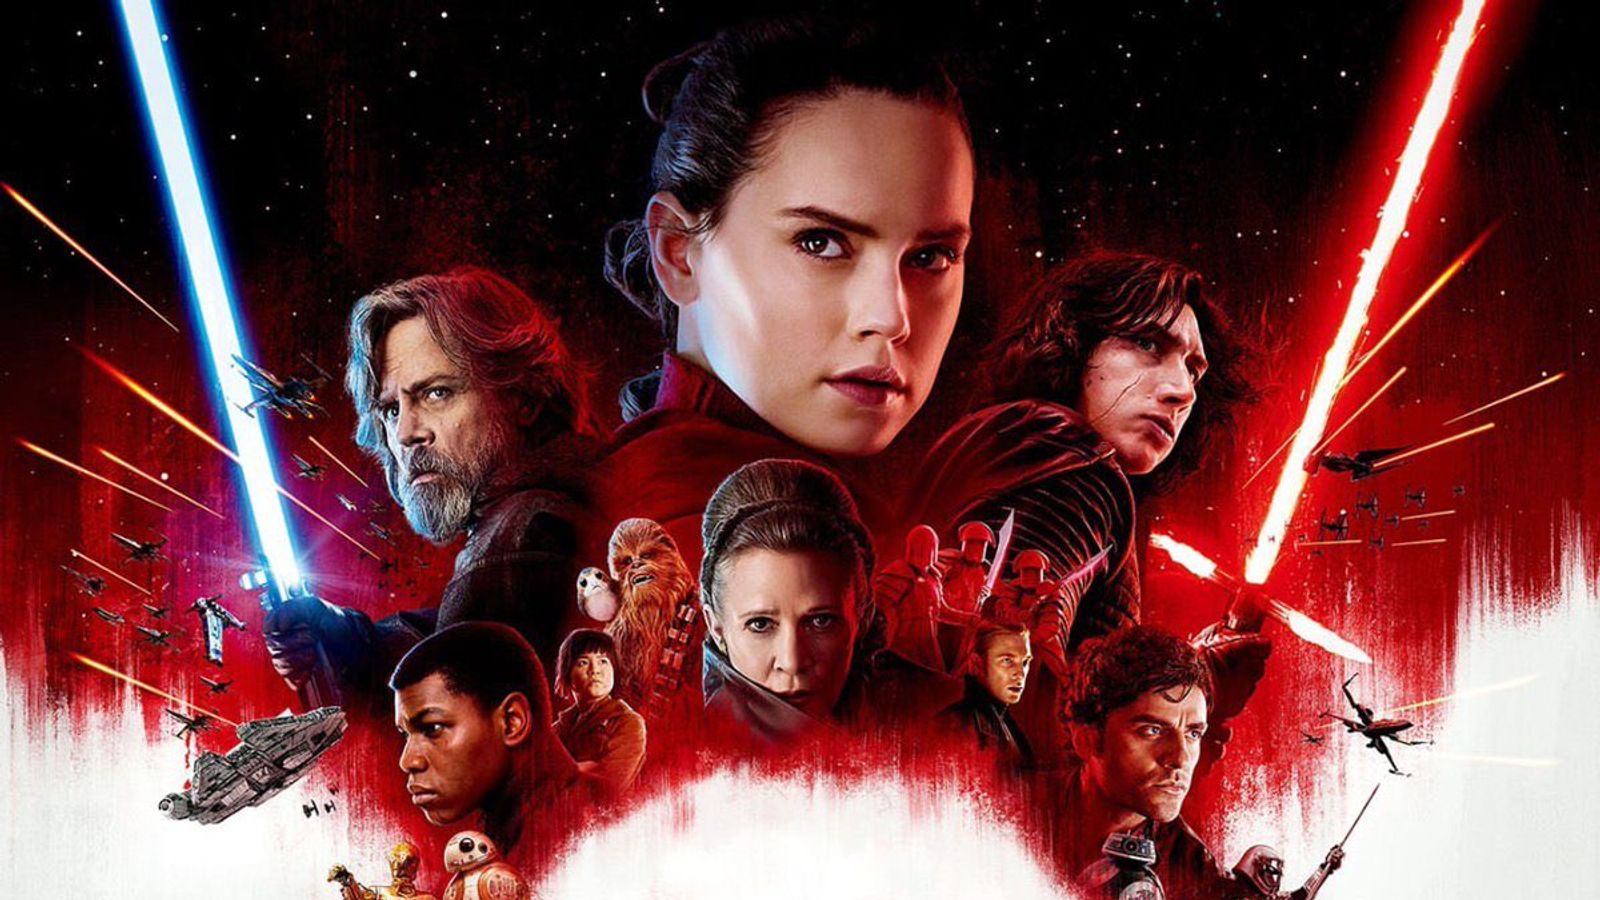 Star Wars: The Last Jedi's first poster is a stunning, nostalgic